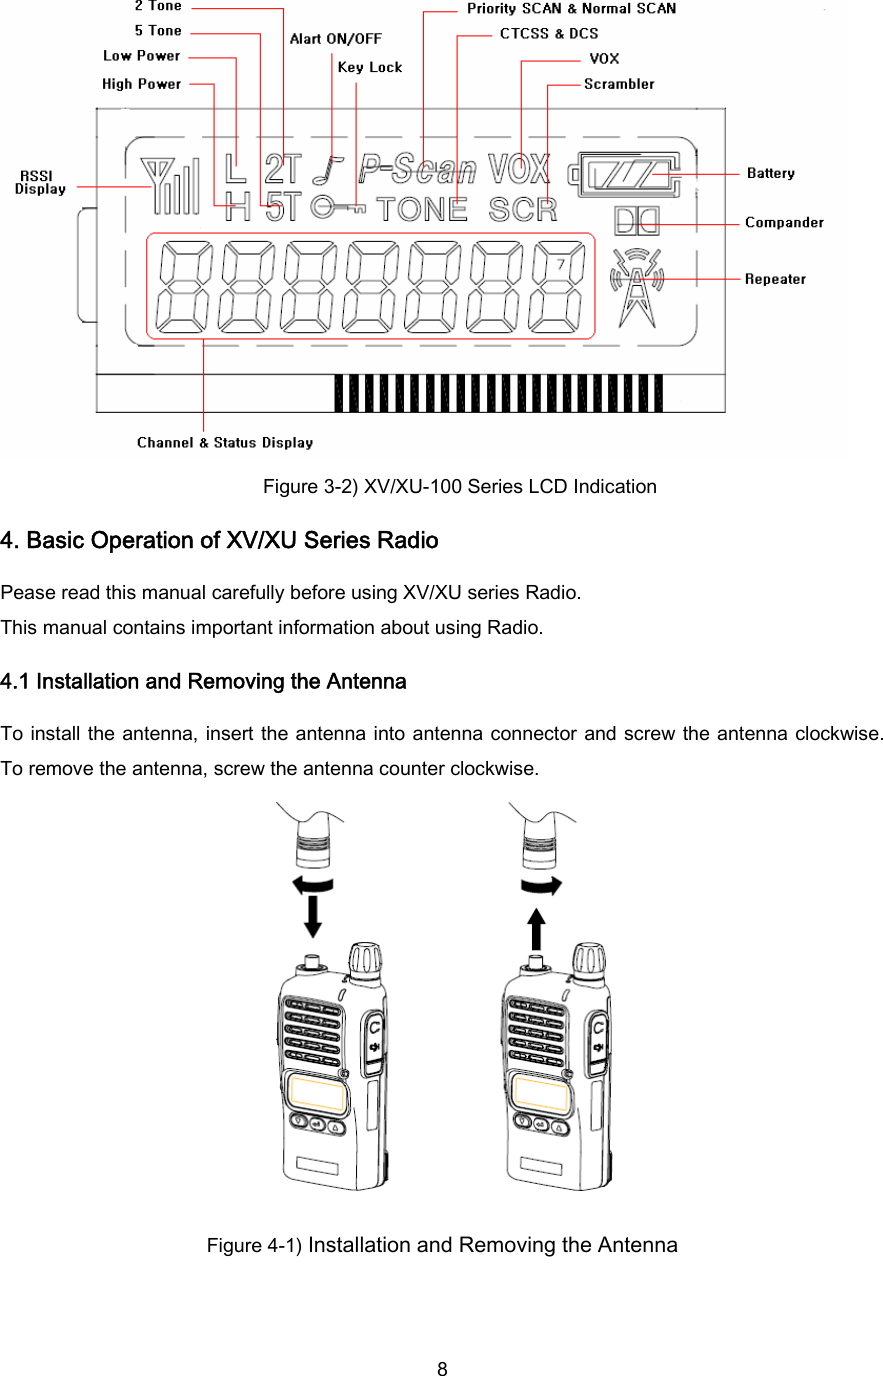  8 Figure 3-2) XV/XU-100 Series LCD Indication 4. Basic Operation of XV/XU Series Radio Pease read this manual carefully before using XV/XU series Radio. This manual contains important information about using Radio. 4.1 Installation and Removing the Antenna  To  install the antenna,  insert  the antenna into antenna connector and screw the antenna clockwise. To remove the antenna, screw the antenna counter clockwise.  Figure 4-1) Installation and Removing the Antenna  